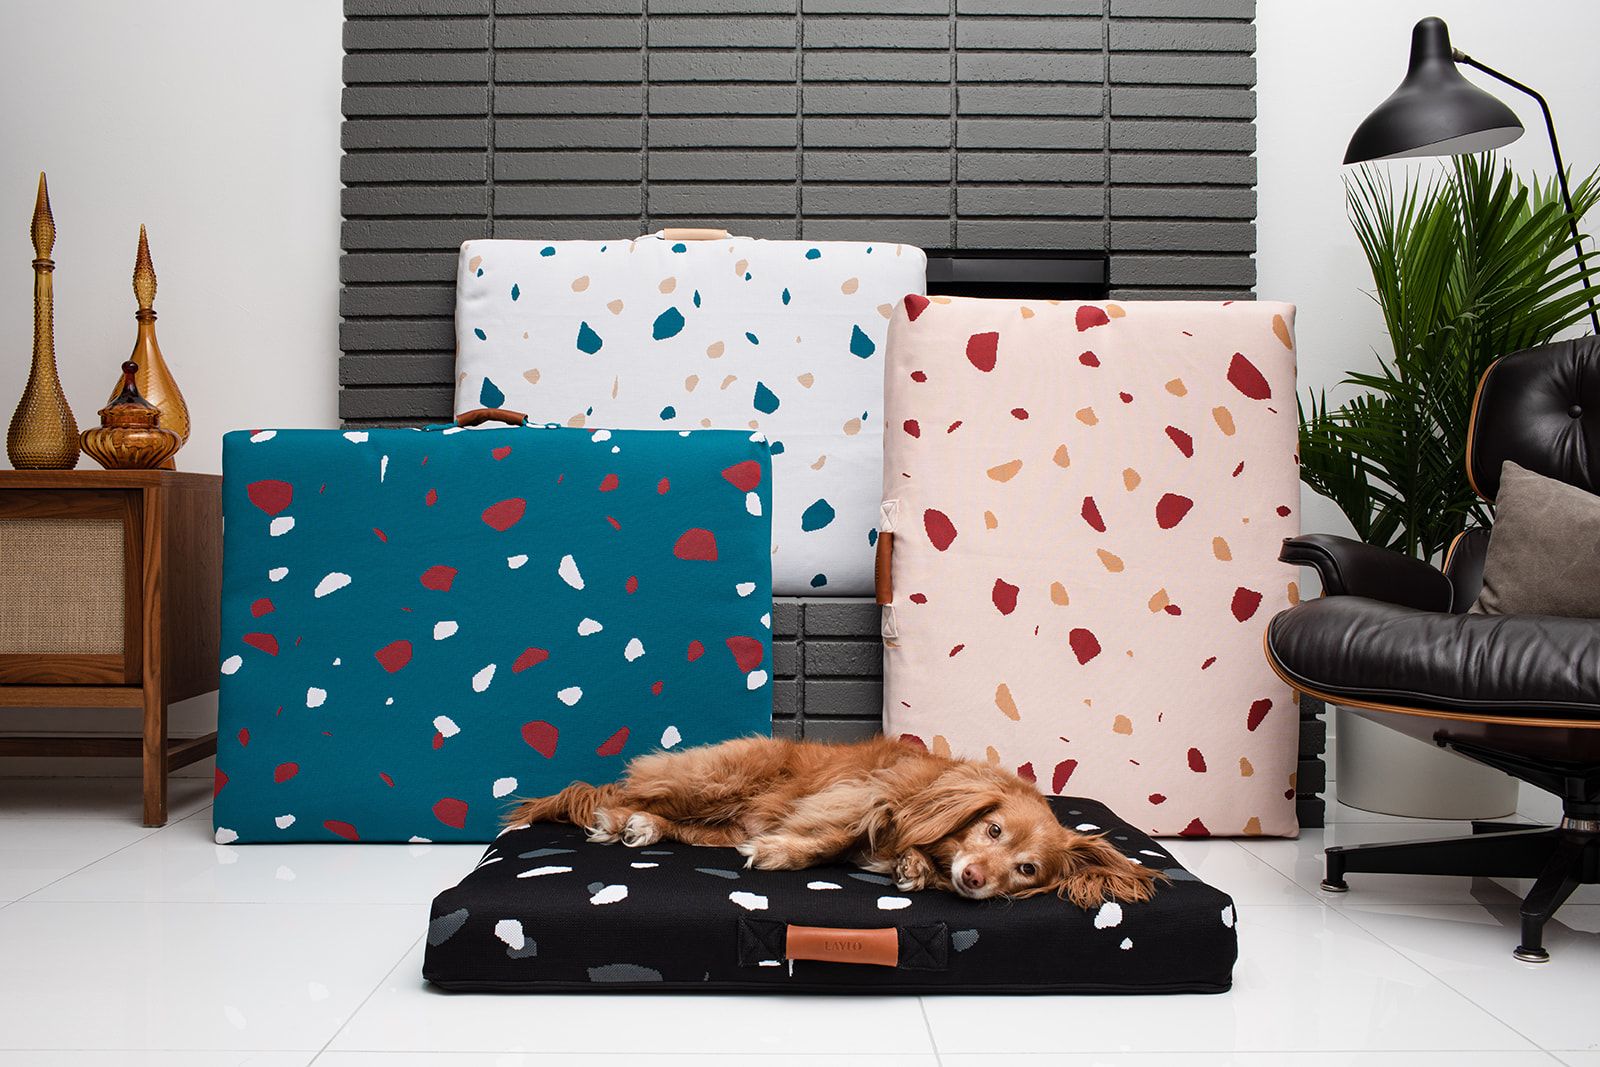 What Makes a Great Dog Bed – According to LAY LO